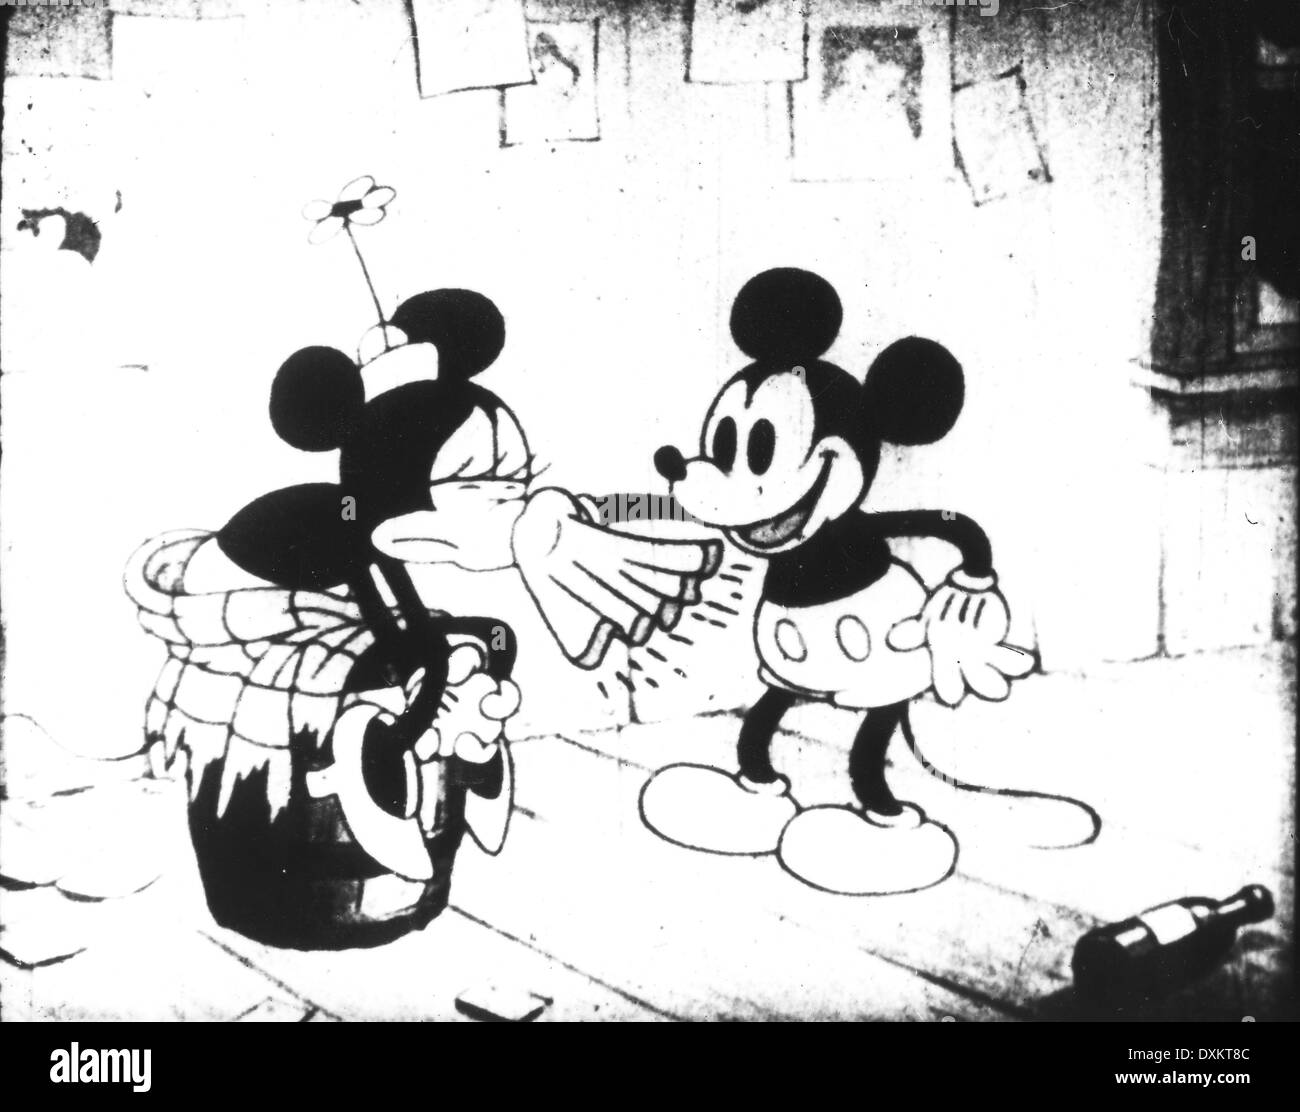 minnie and mickey mouse tumblr black and white